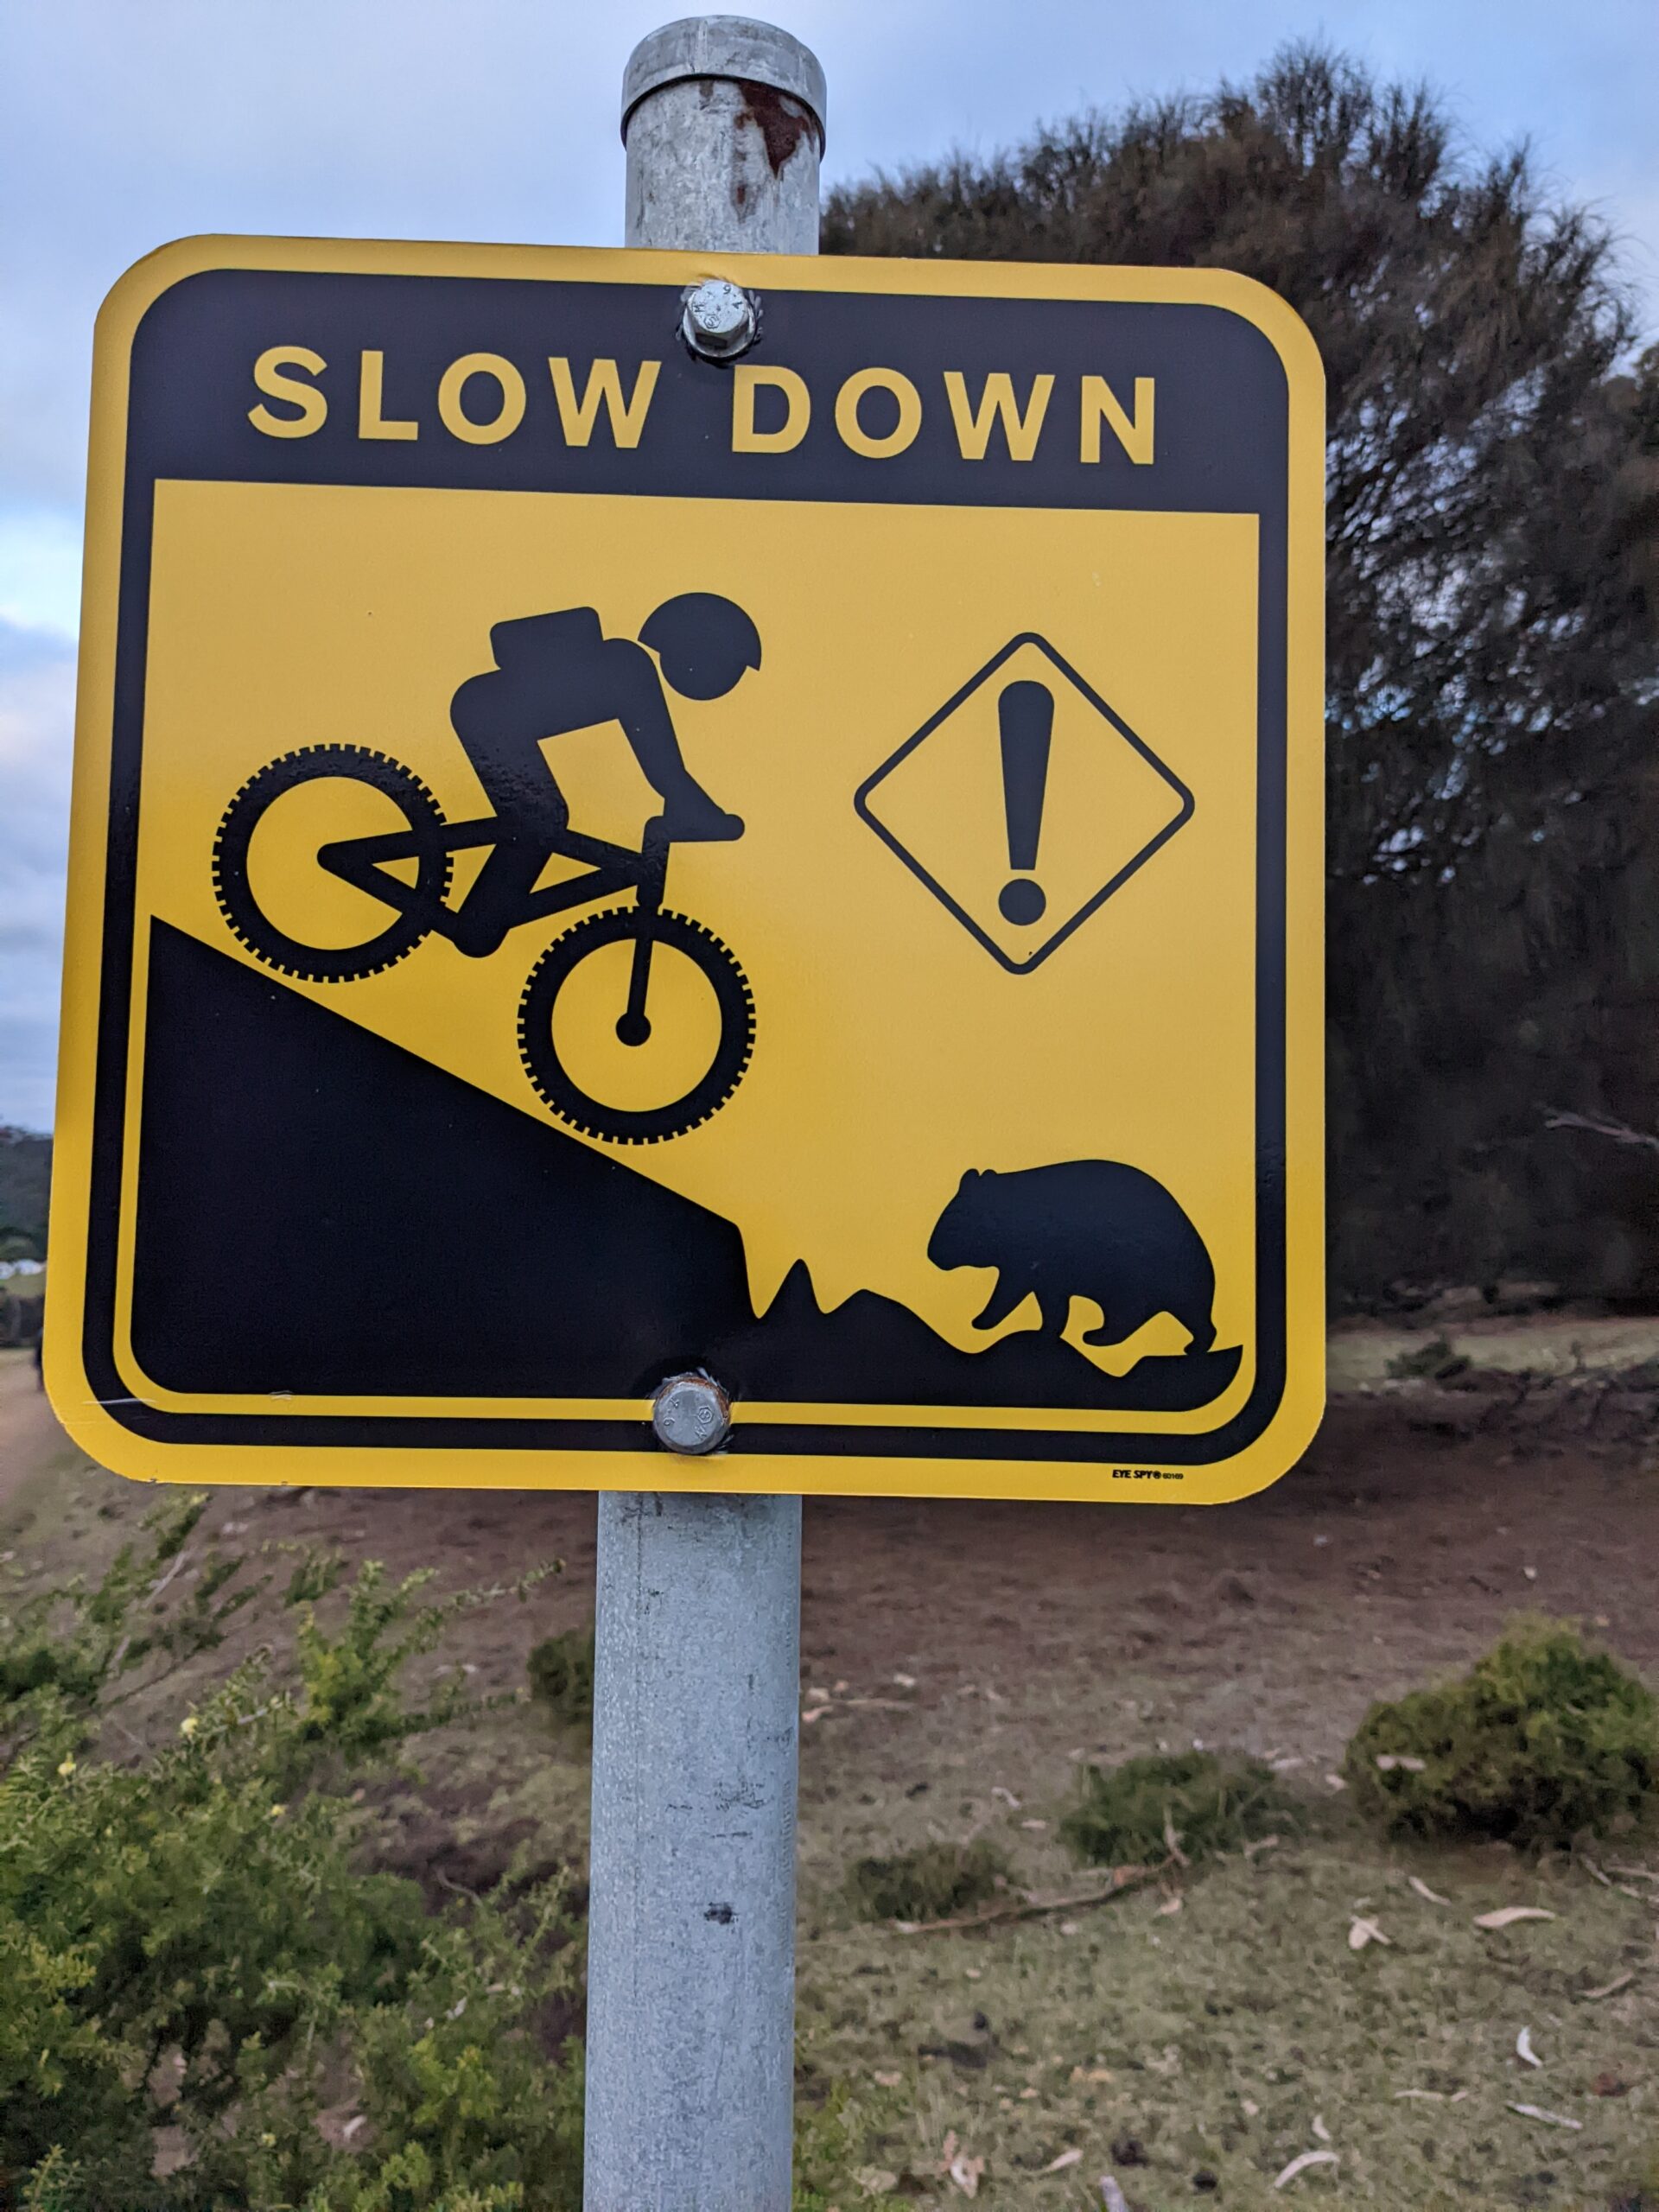 Slow down sign. Downhill cyclist heading towards a wombat.